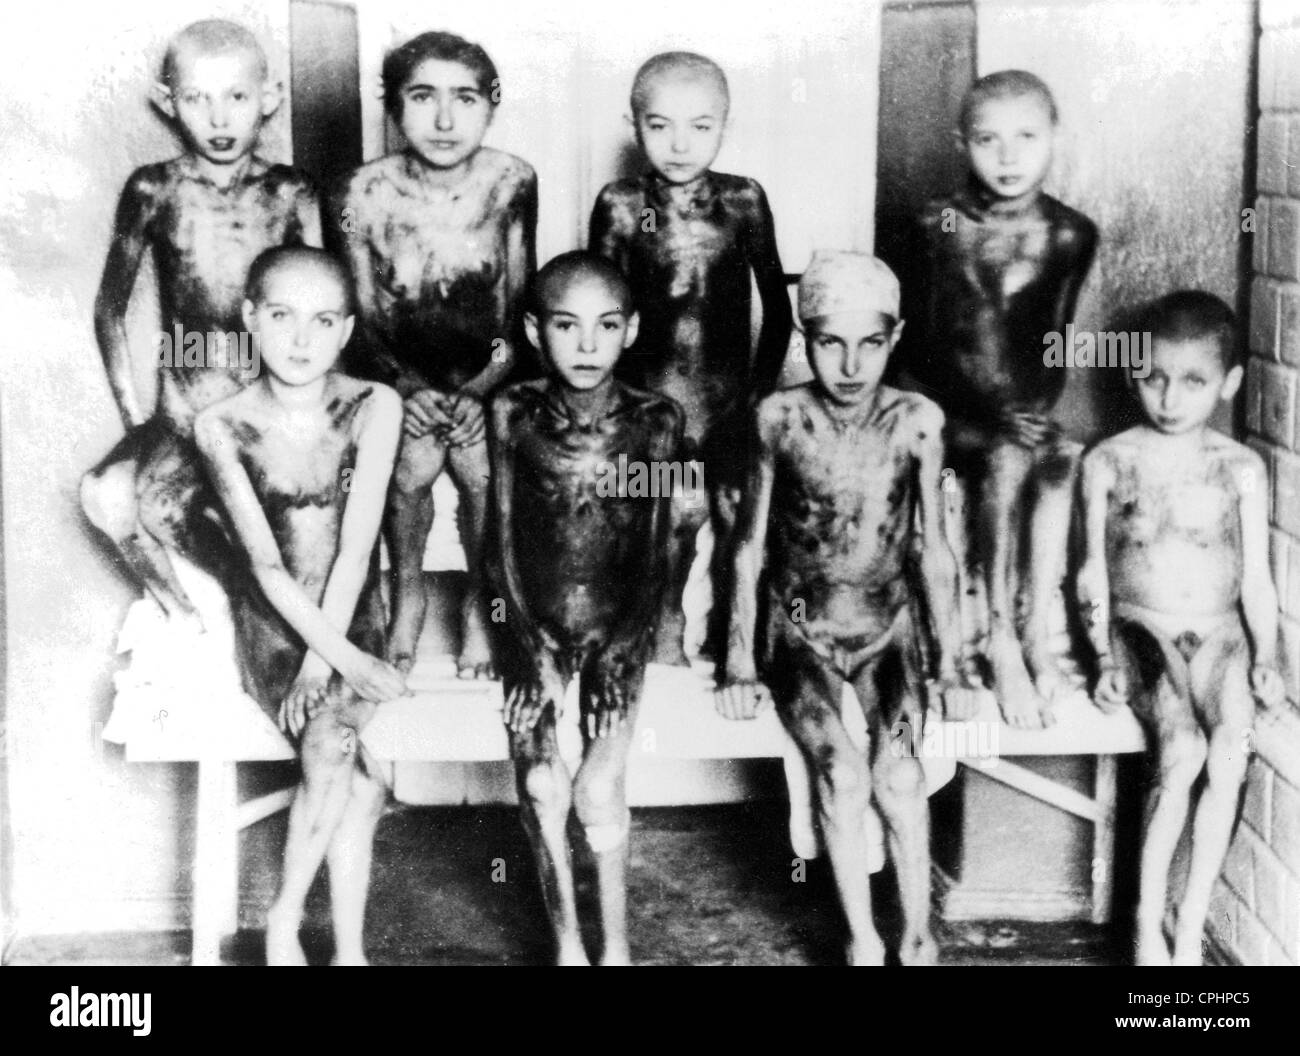 Child victims of Nazi medical experiments at Auschwitz concentration camp, Poland, 1940-45 (b/w photo) Stock Photo